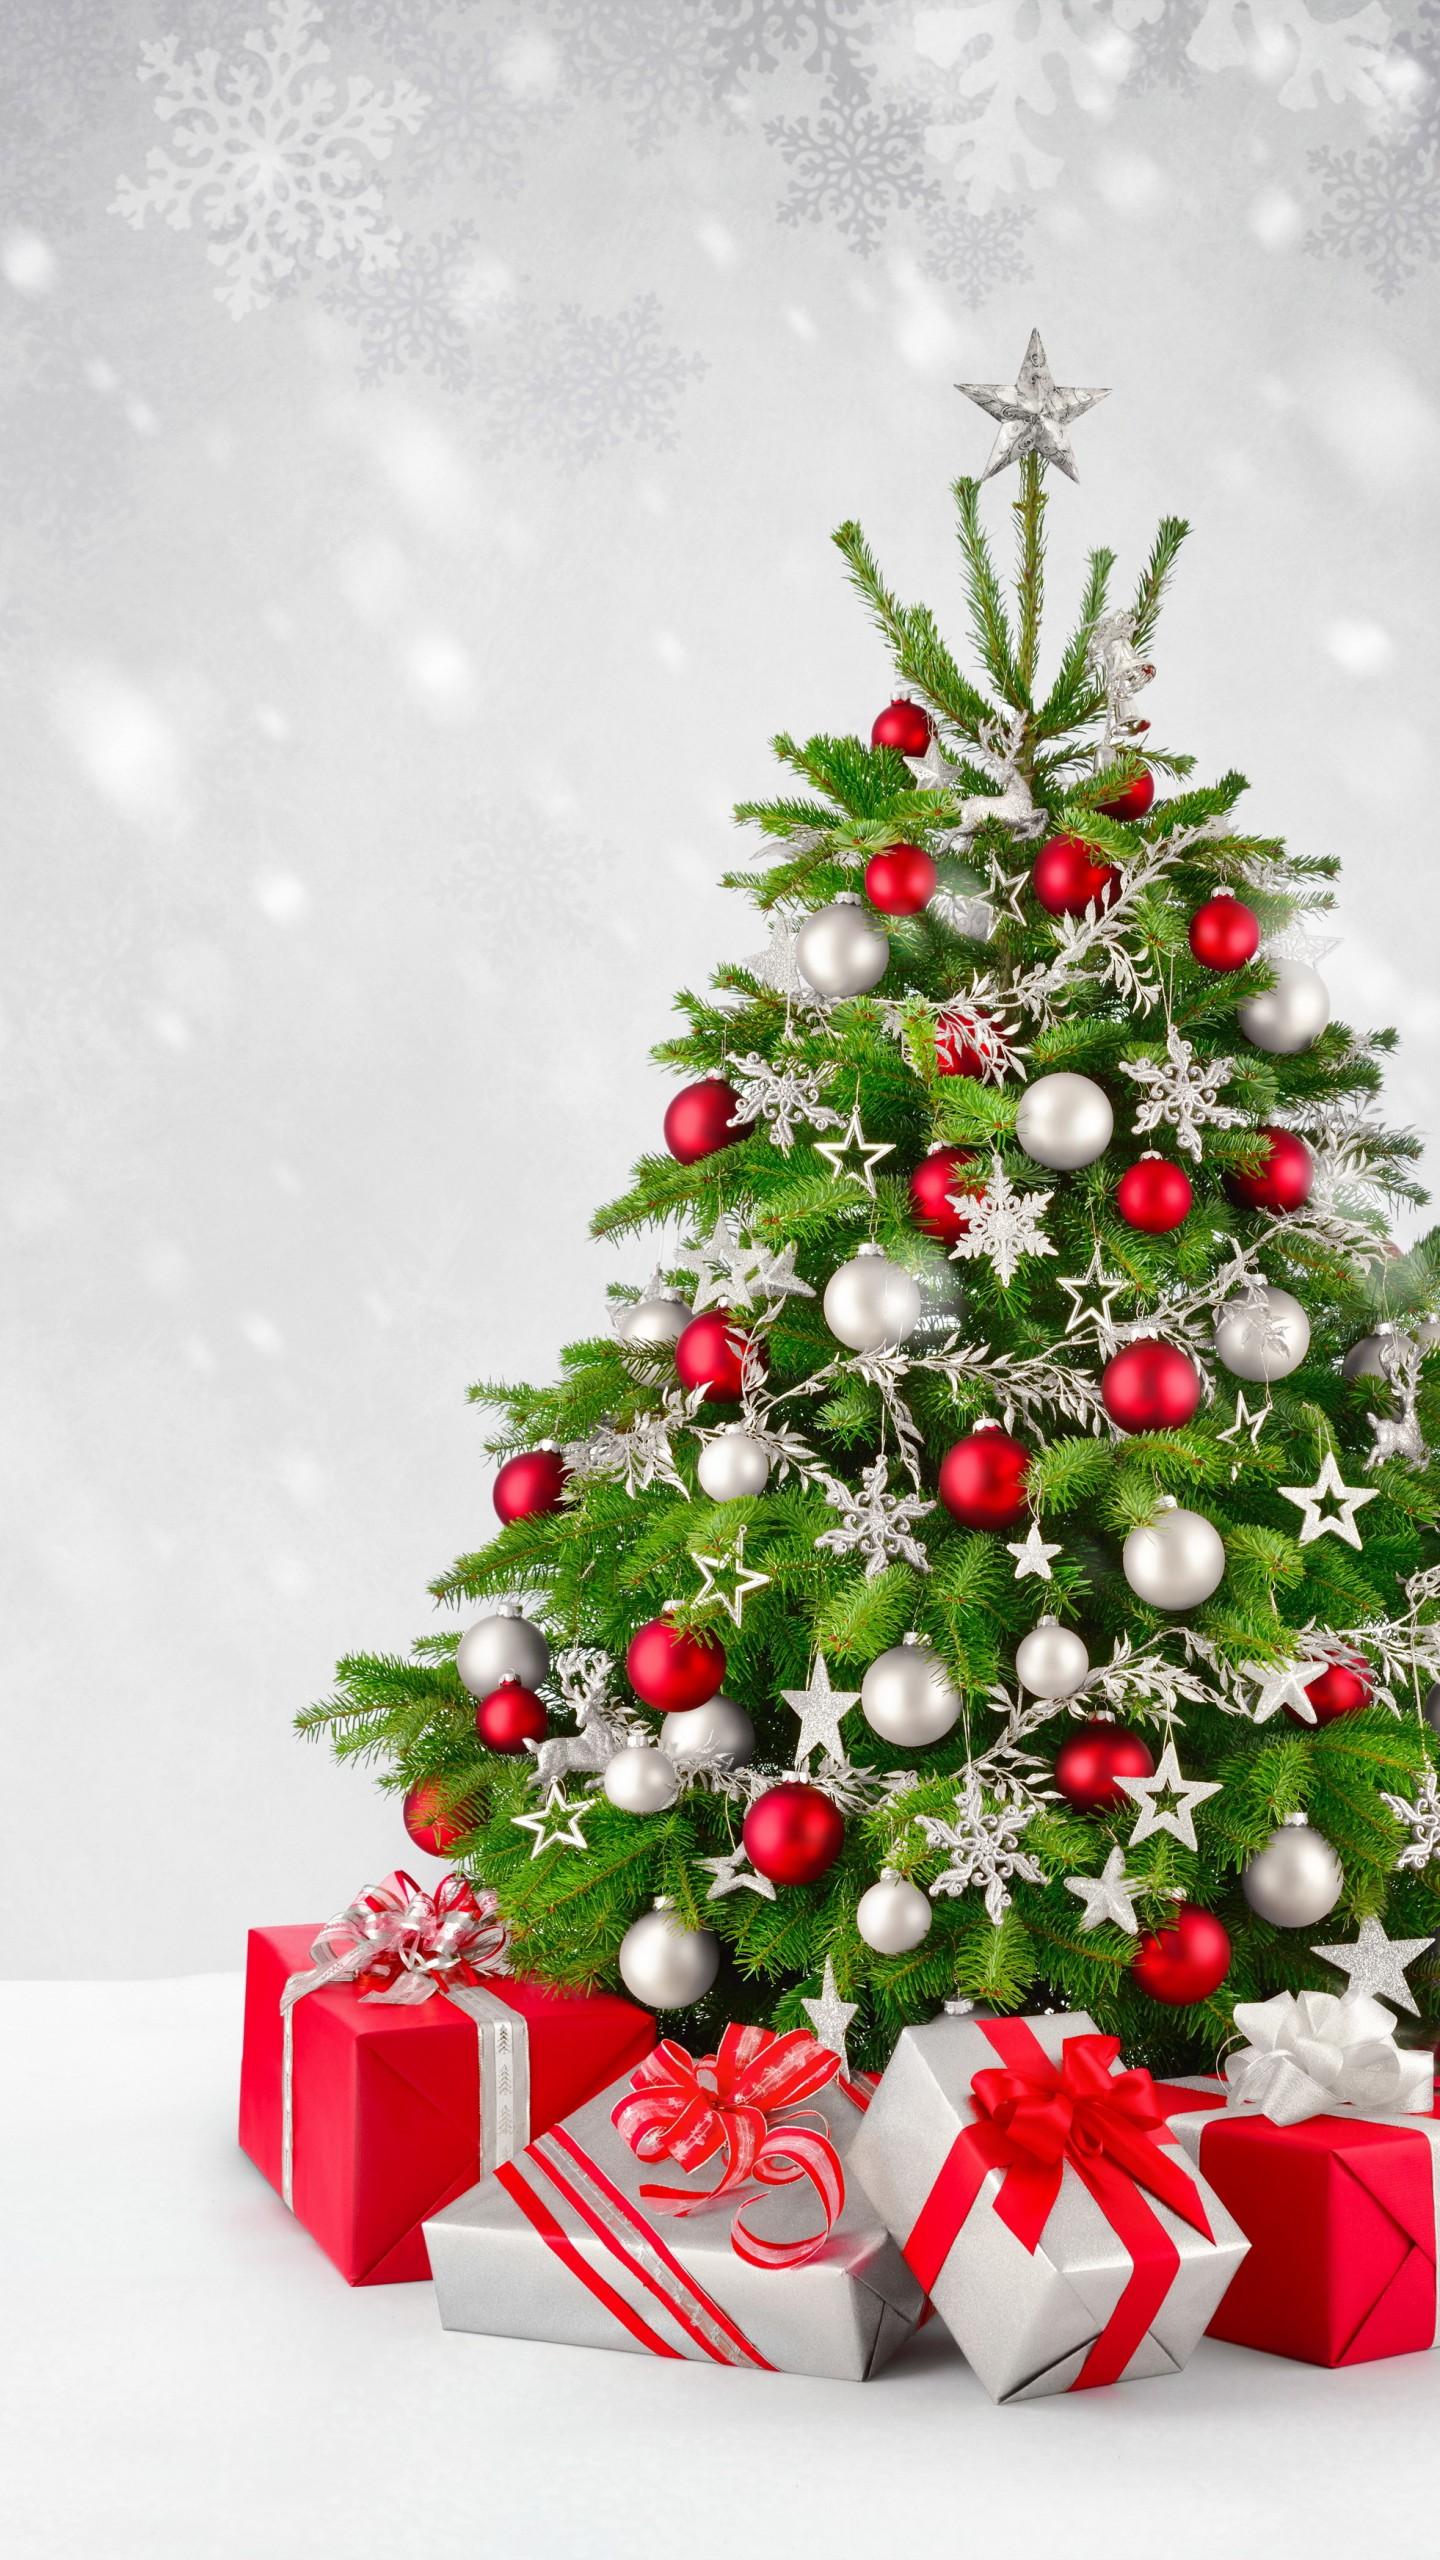 Wallpaper Christmas tree, Decoration, Presents, Gifts